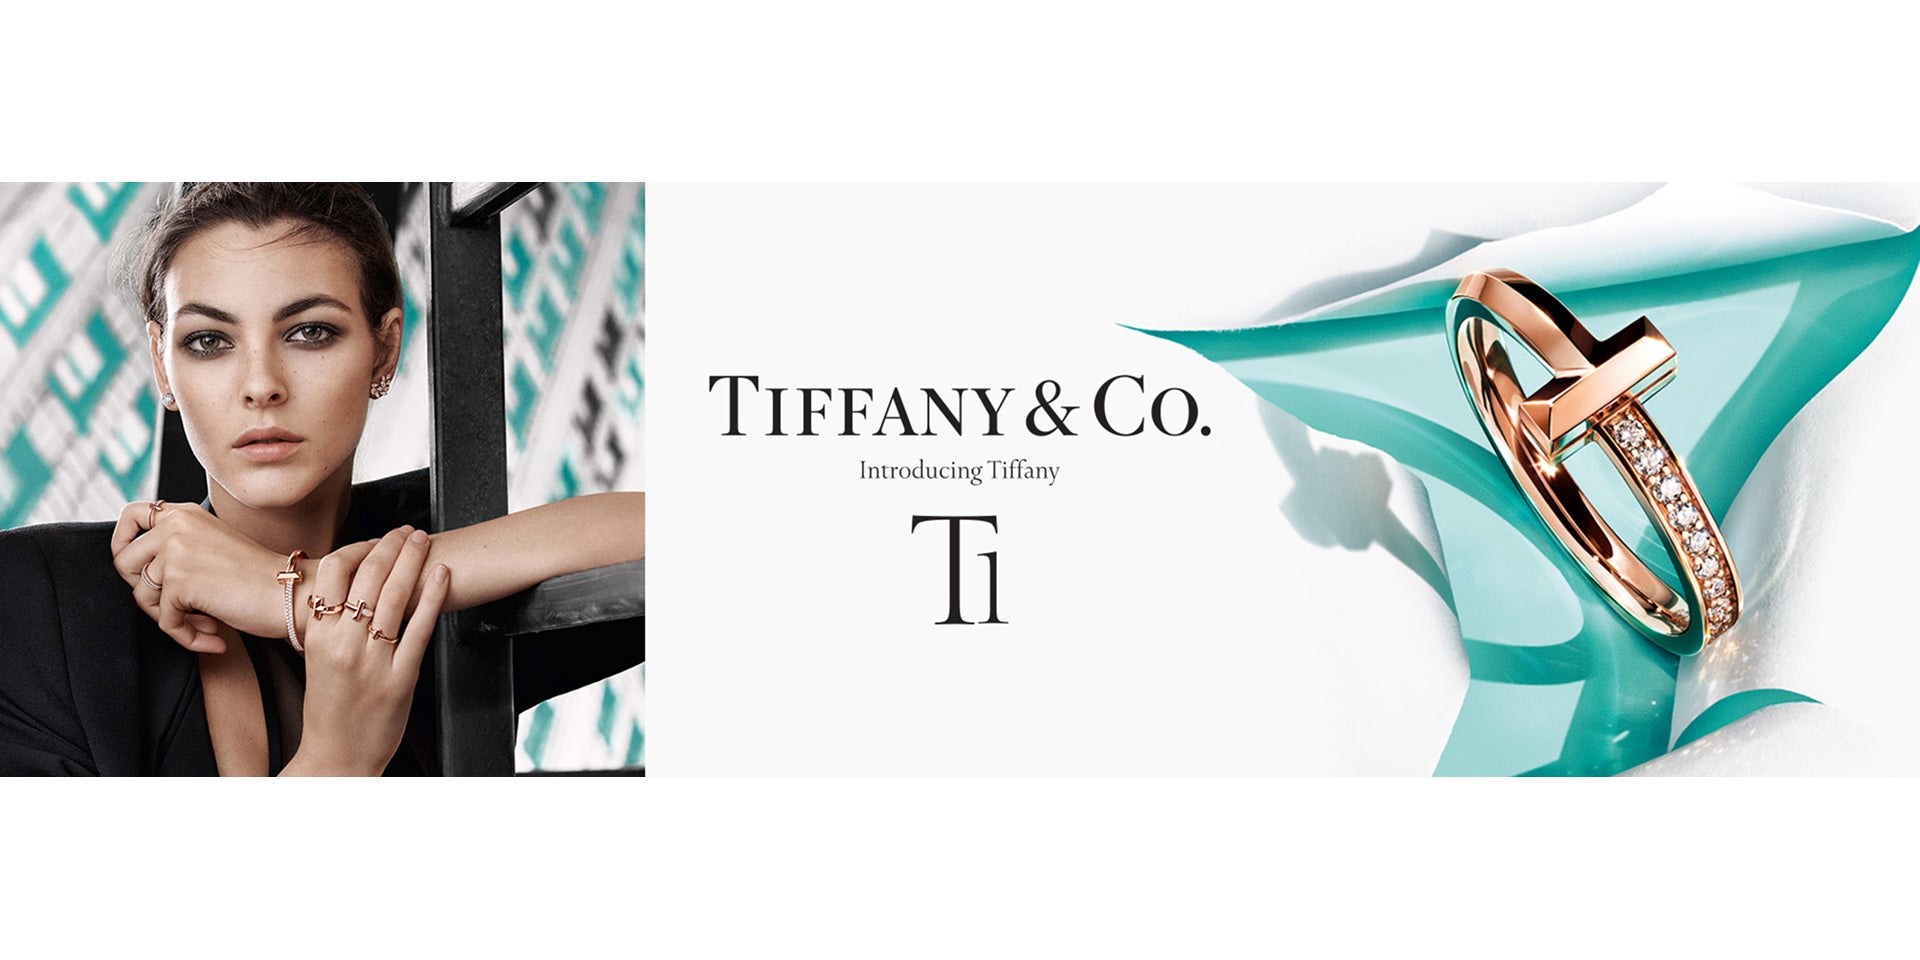 tiffany & co from which country